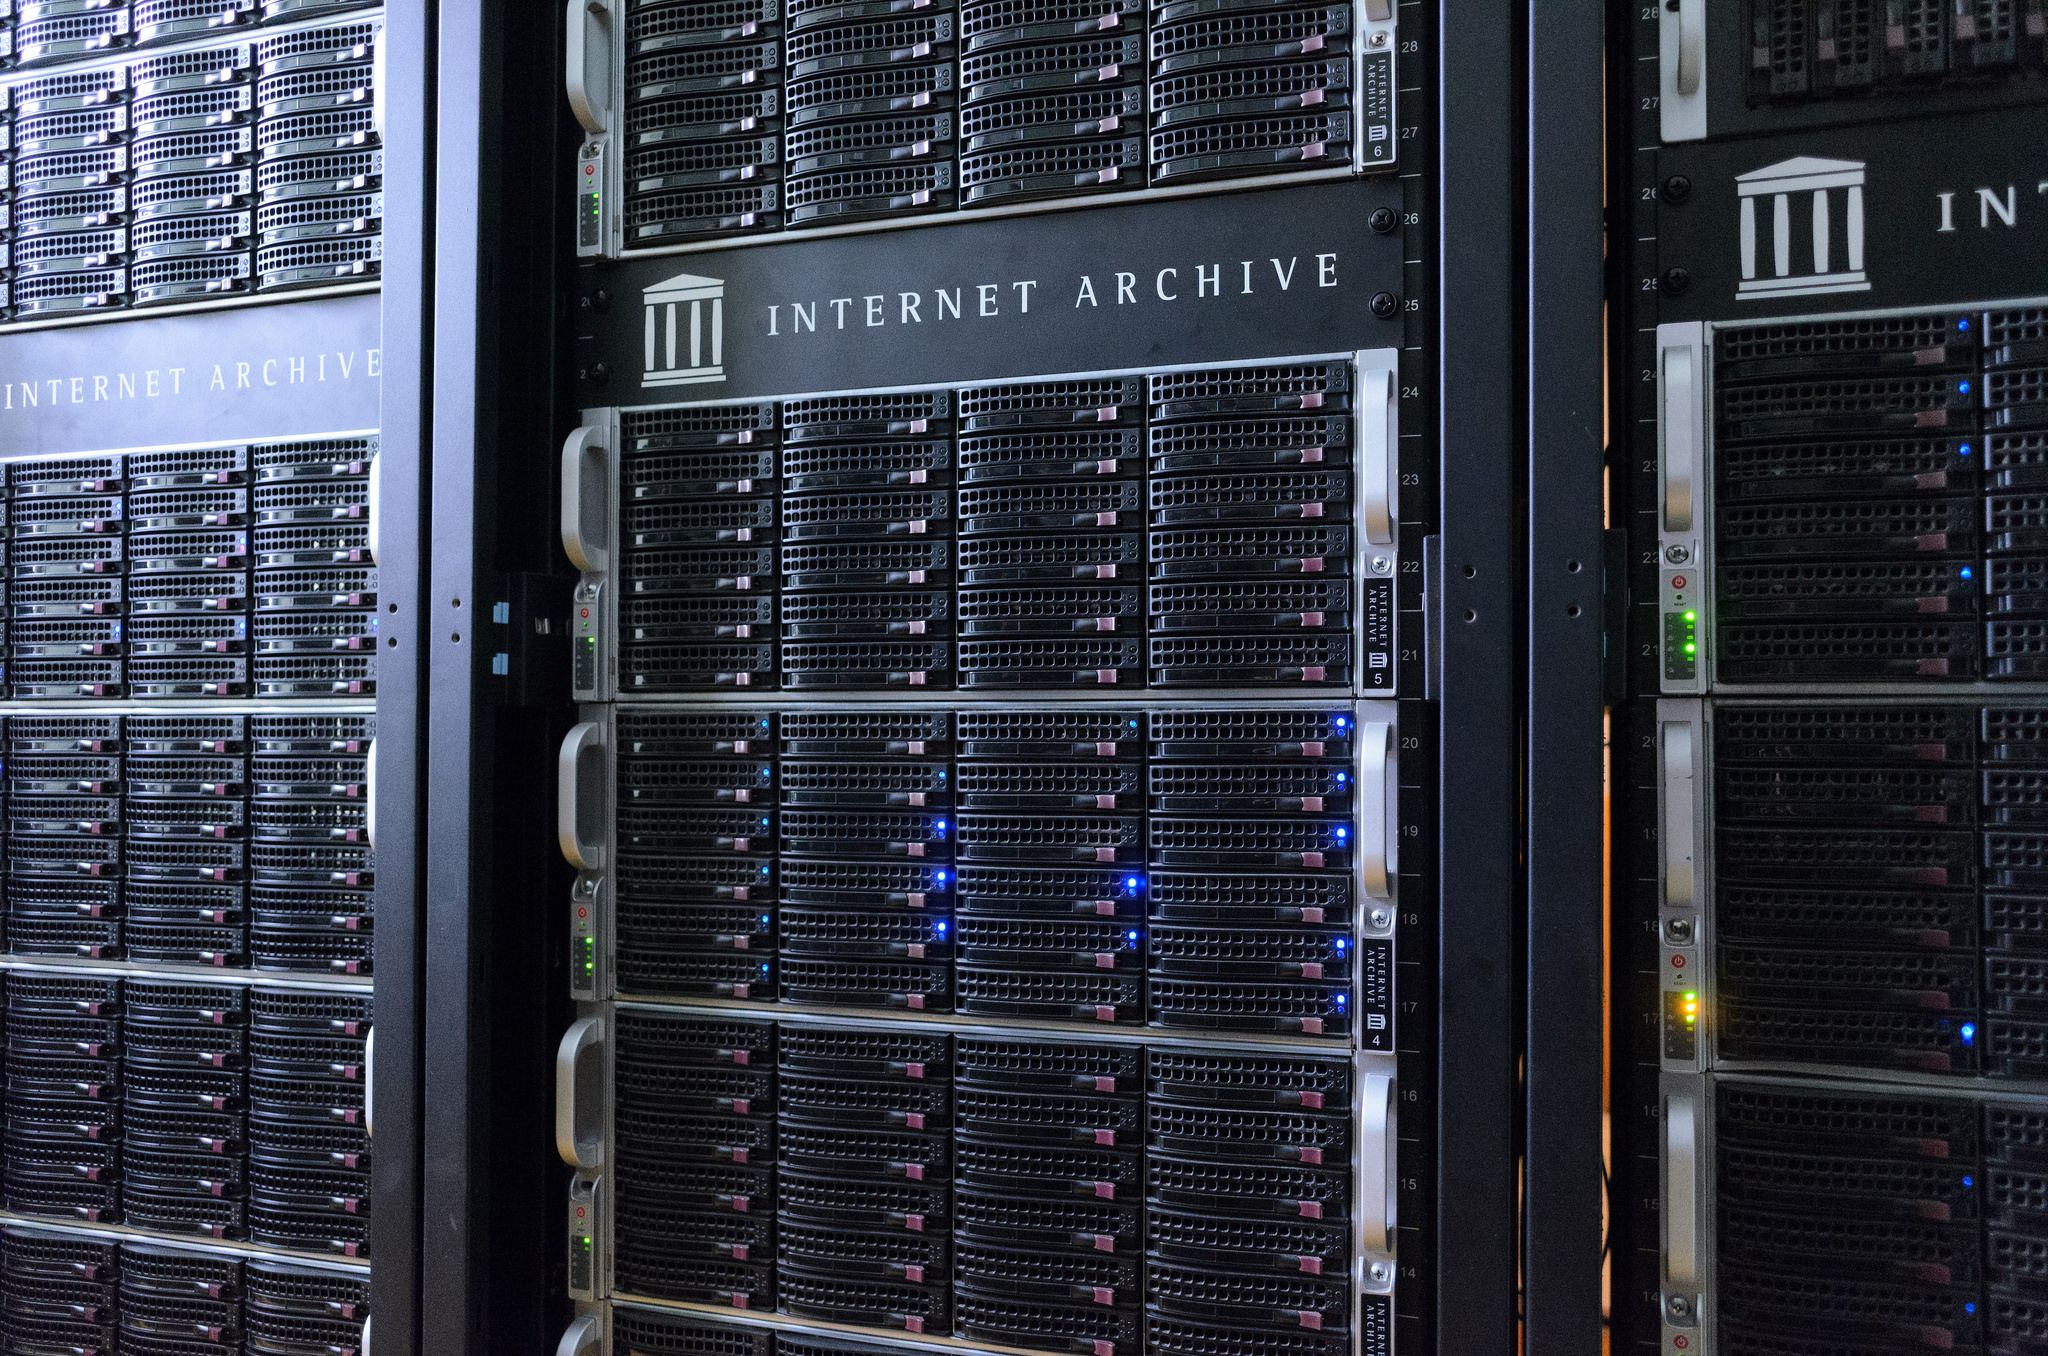 Racks of servers with the Internet Archive logo on them